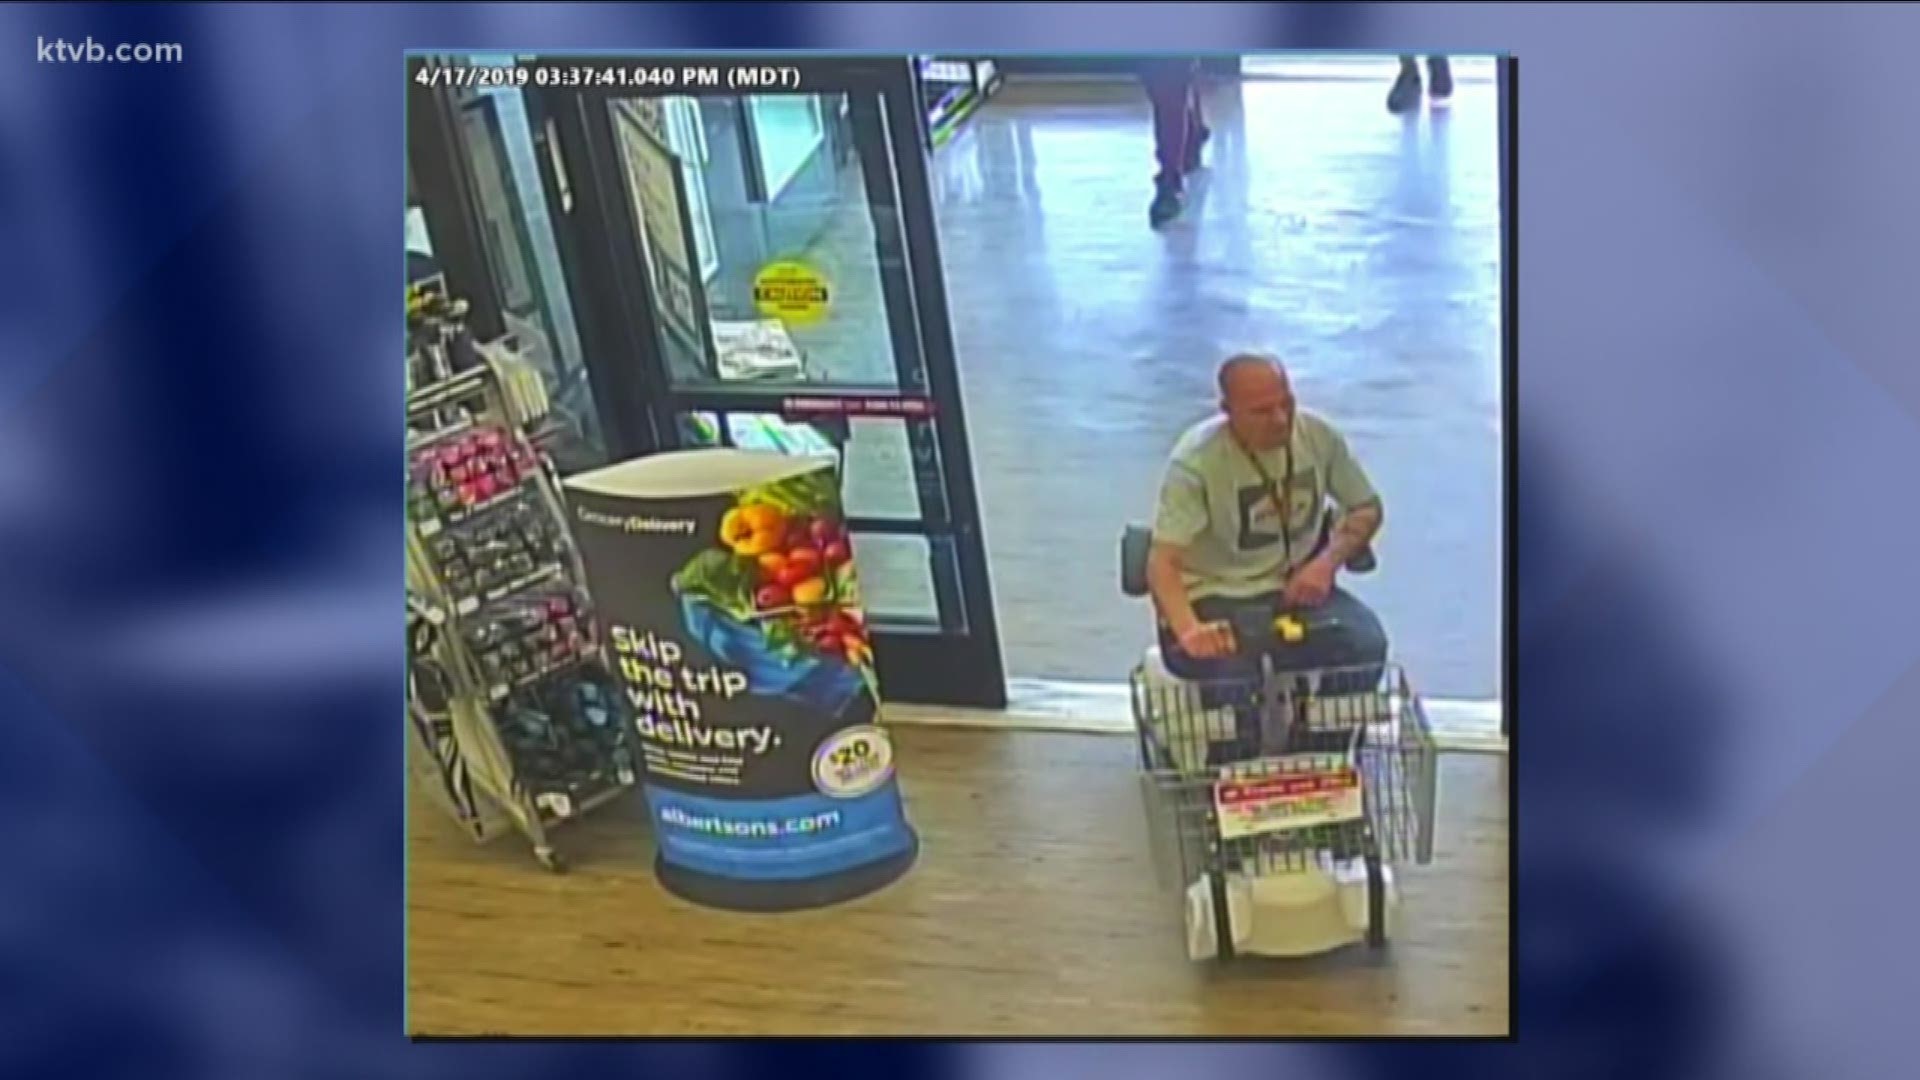 "Somebody knows who this gentleman is." Call (208) 343-COPS if you might have a tip about one of these suspects.